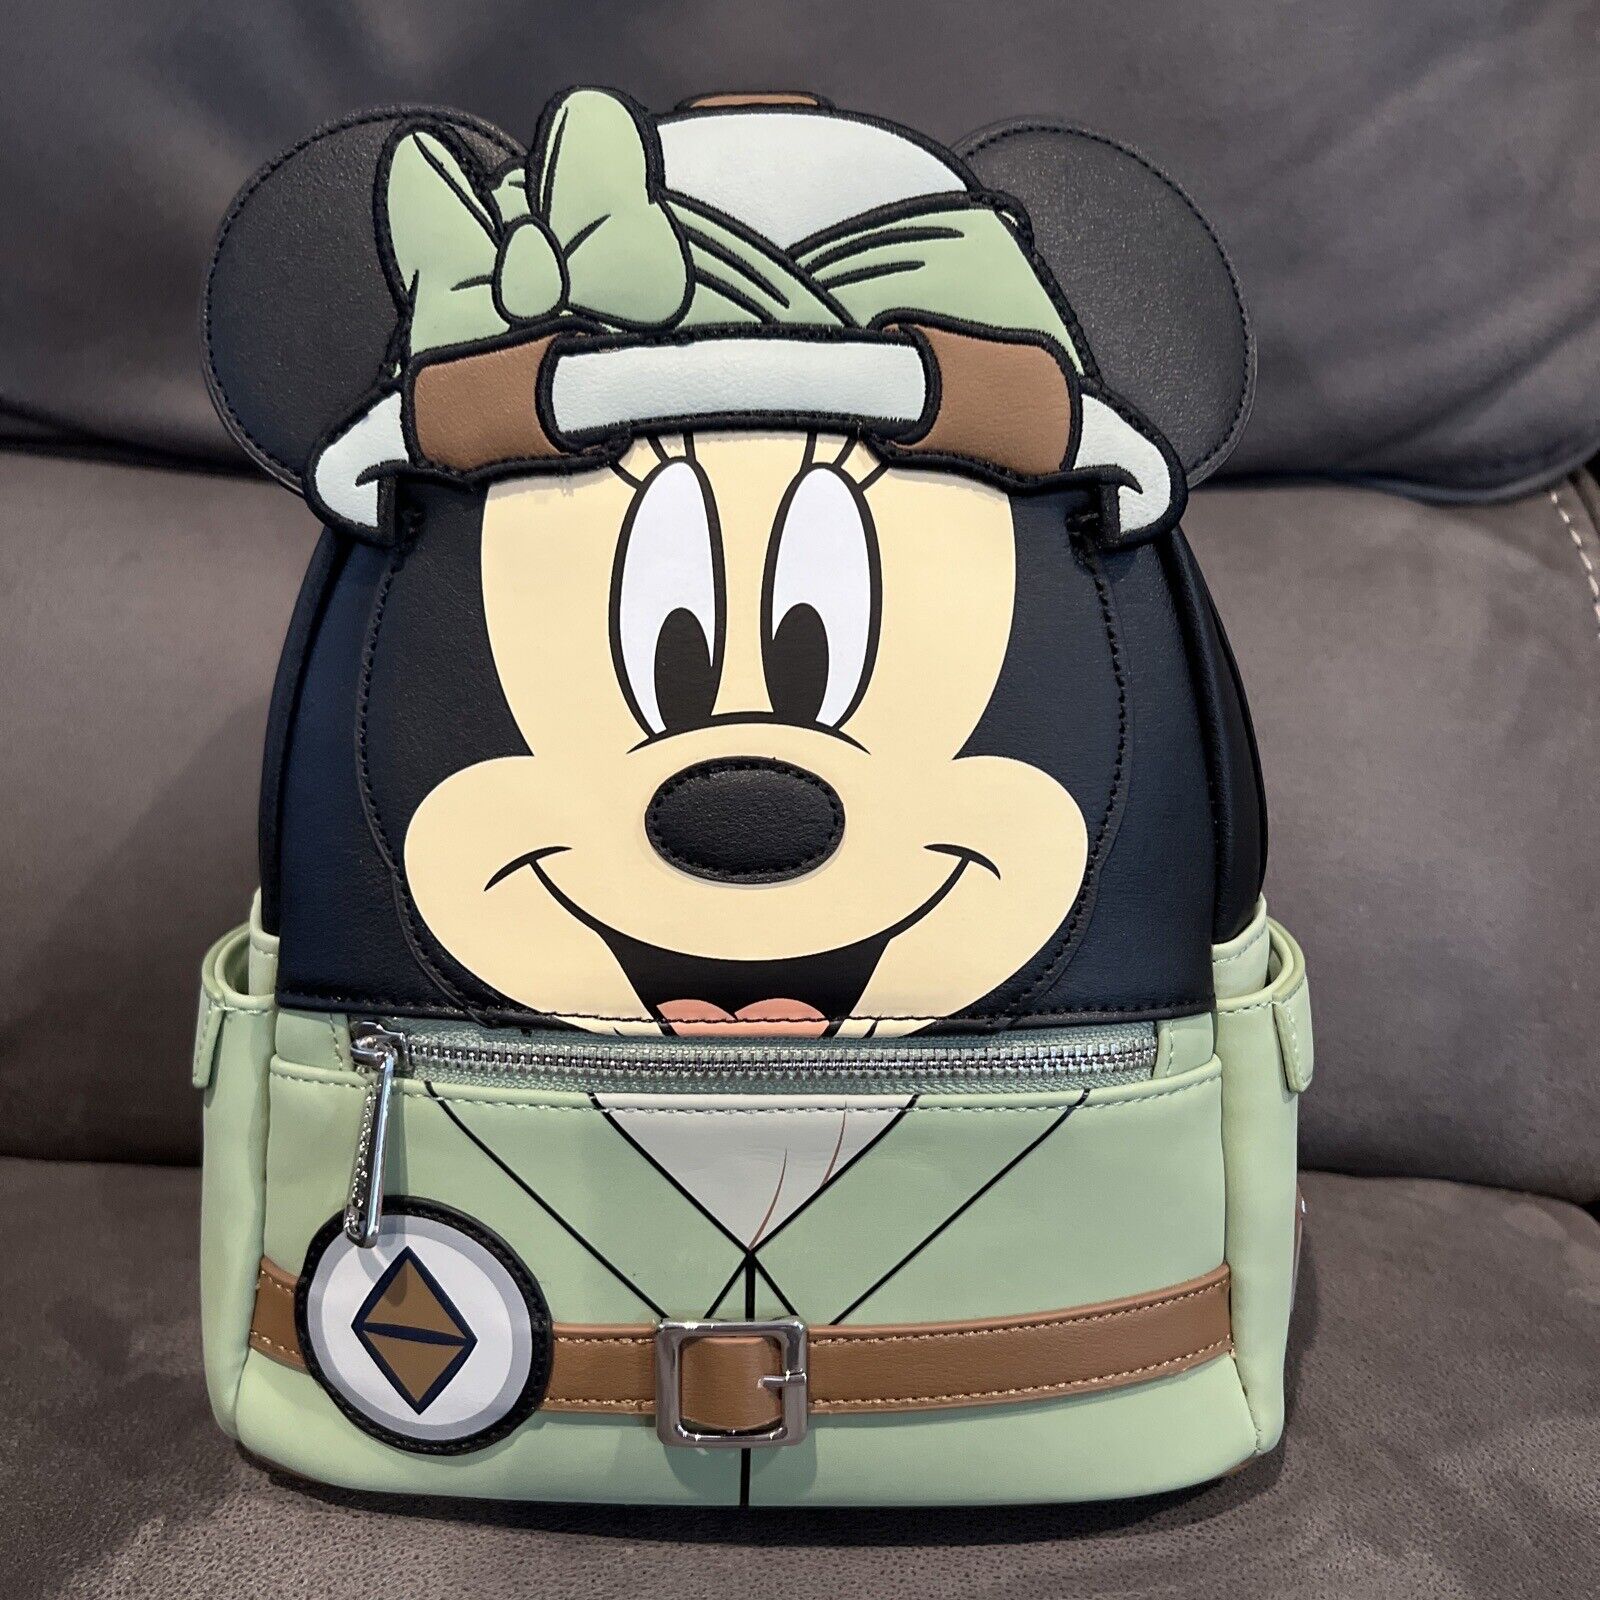 Minnie Mouse Mini Backpack by Loungefly – Disney's Animal Kingdom